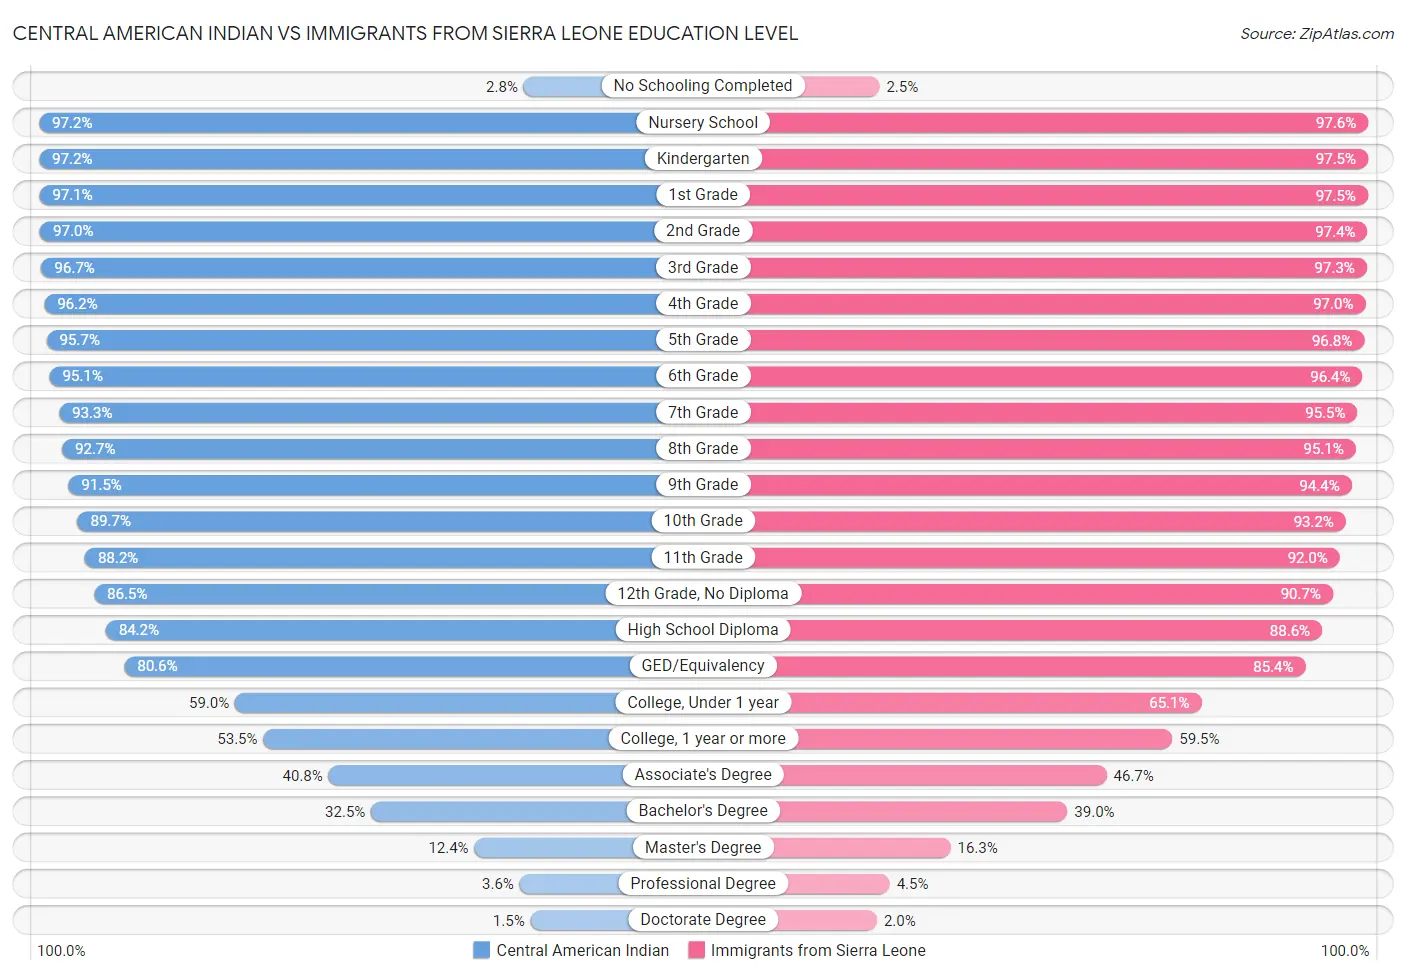 Central American Indian vs Immigrants from Sierra Leone Education Level